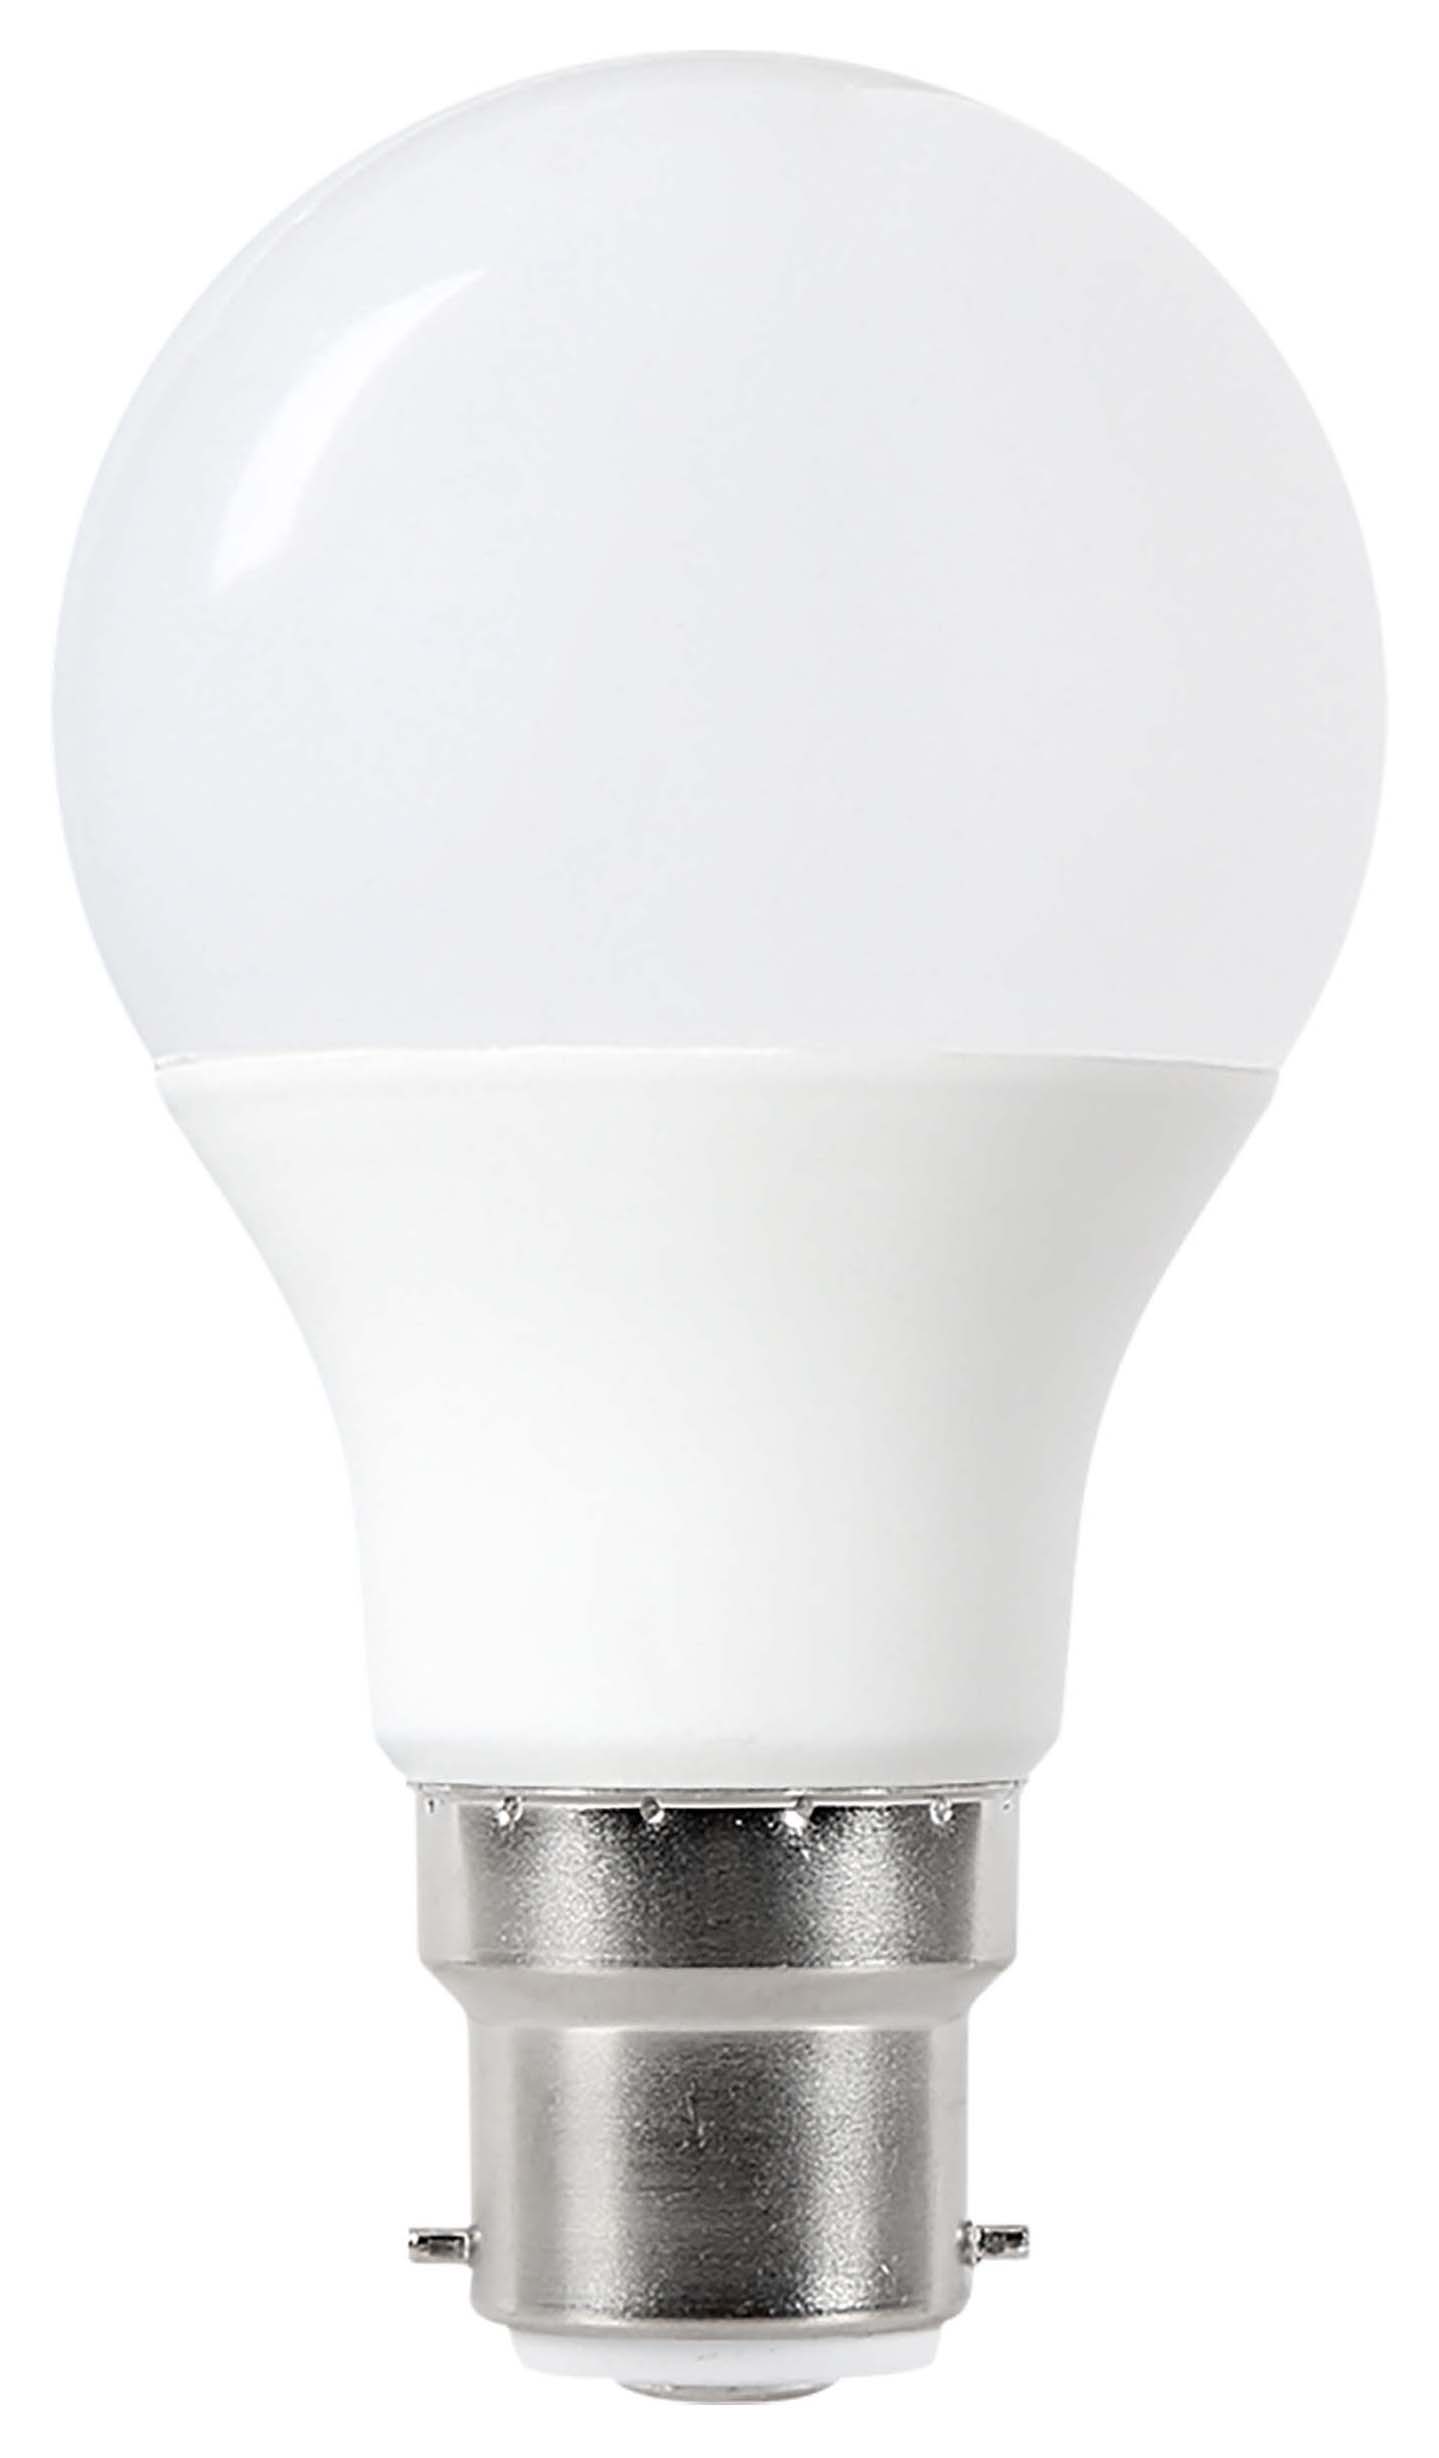 Wickes Non-Dimmable GLS Opal LED B22 8.8W Warm White Light Bulb